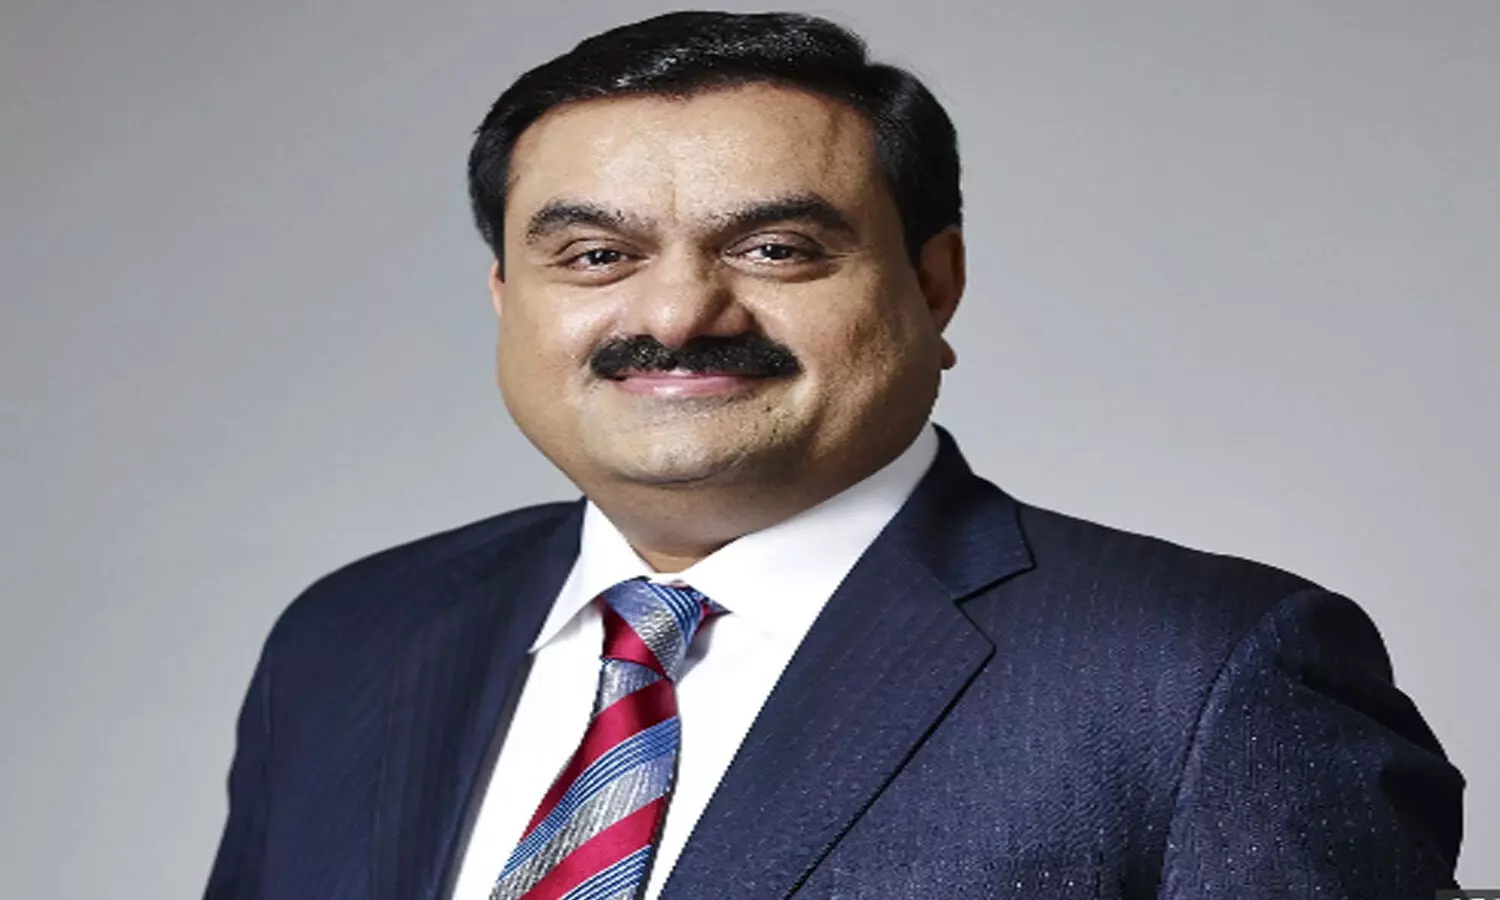 Adani group takes over control and management of Mumbai airport